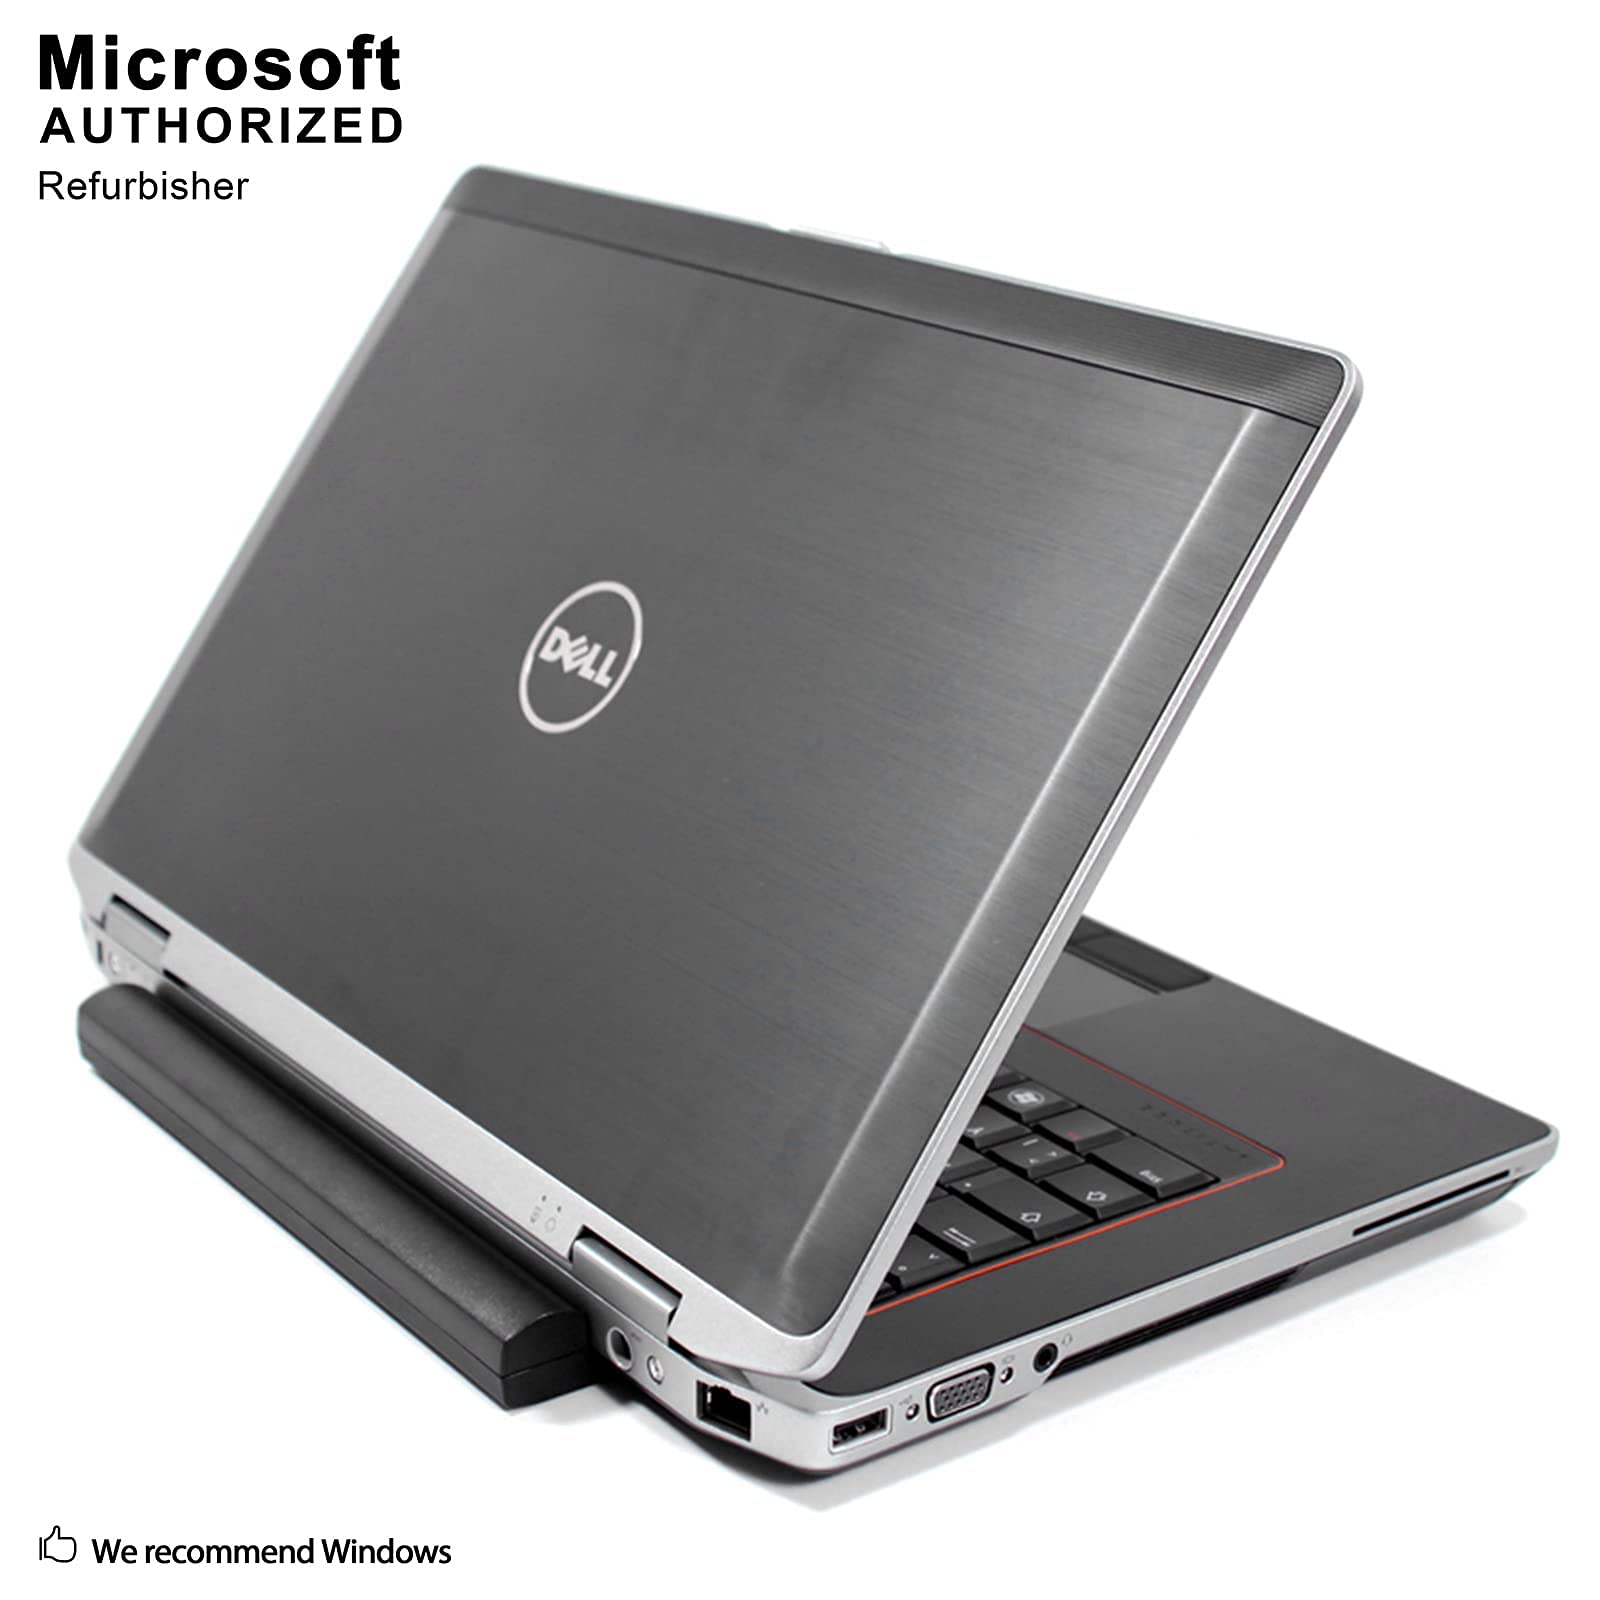 11. Once the recovery is finished, restart your computer
12. Test your Dell Latitude E6420 to ensure the issue has been resolved